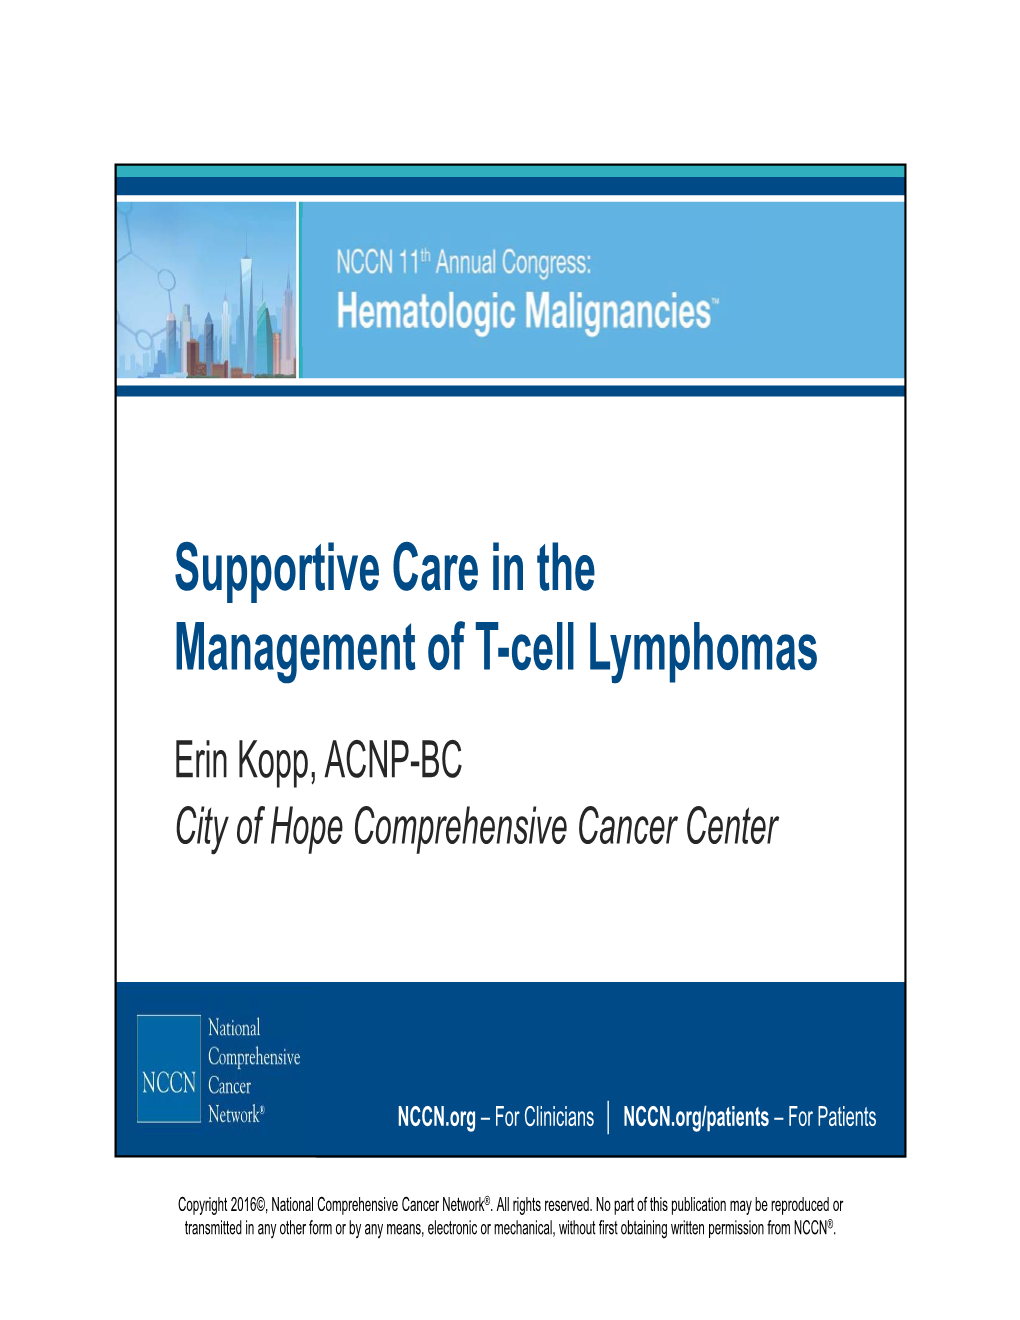 Supportive Care in the Management of T-Cell Lymphomas